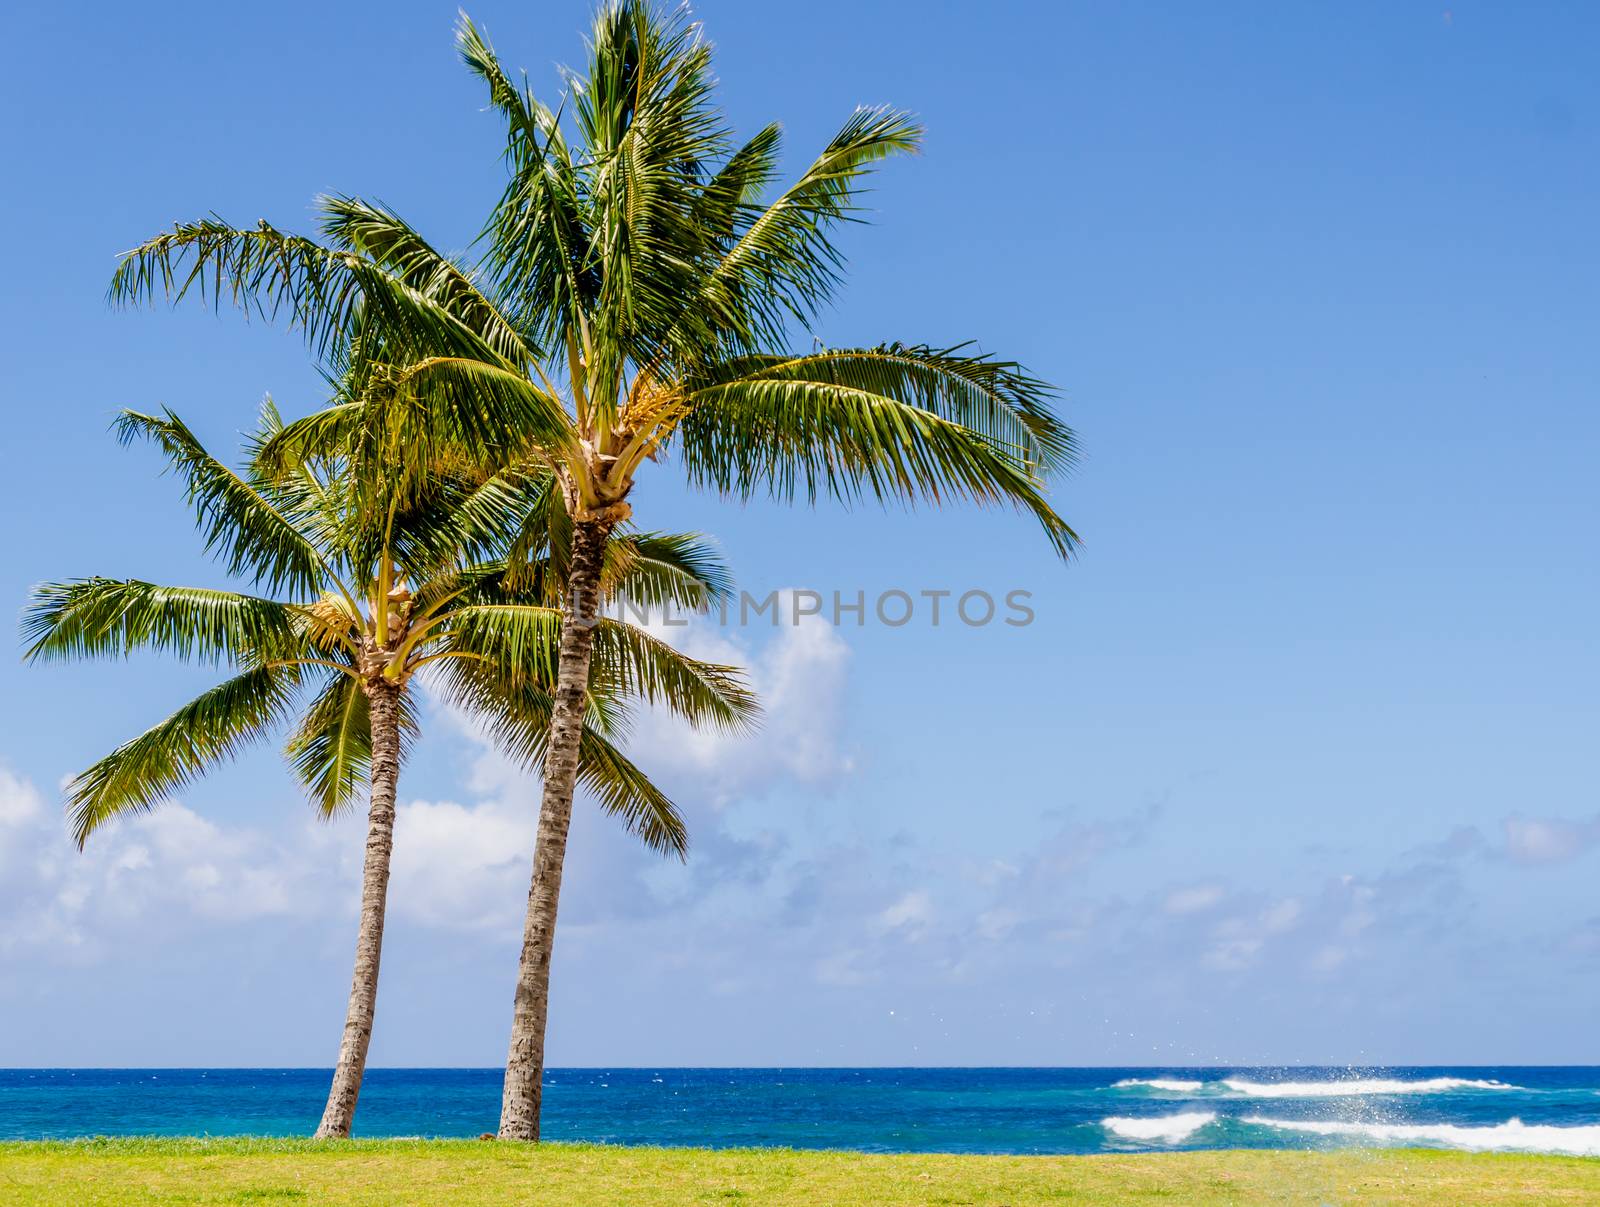 Cococnut Palm trees on the sandy Poipu beach in Hawaii by EllenSmile